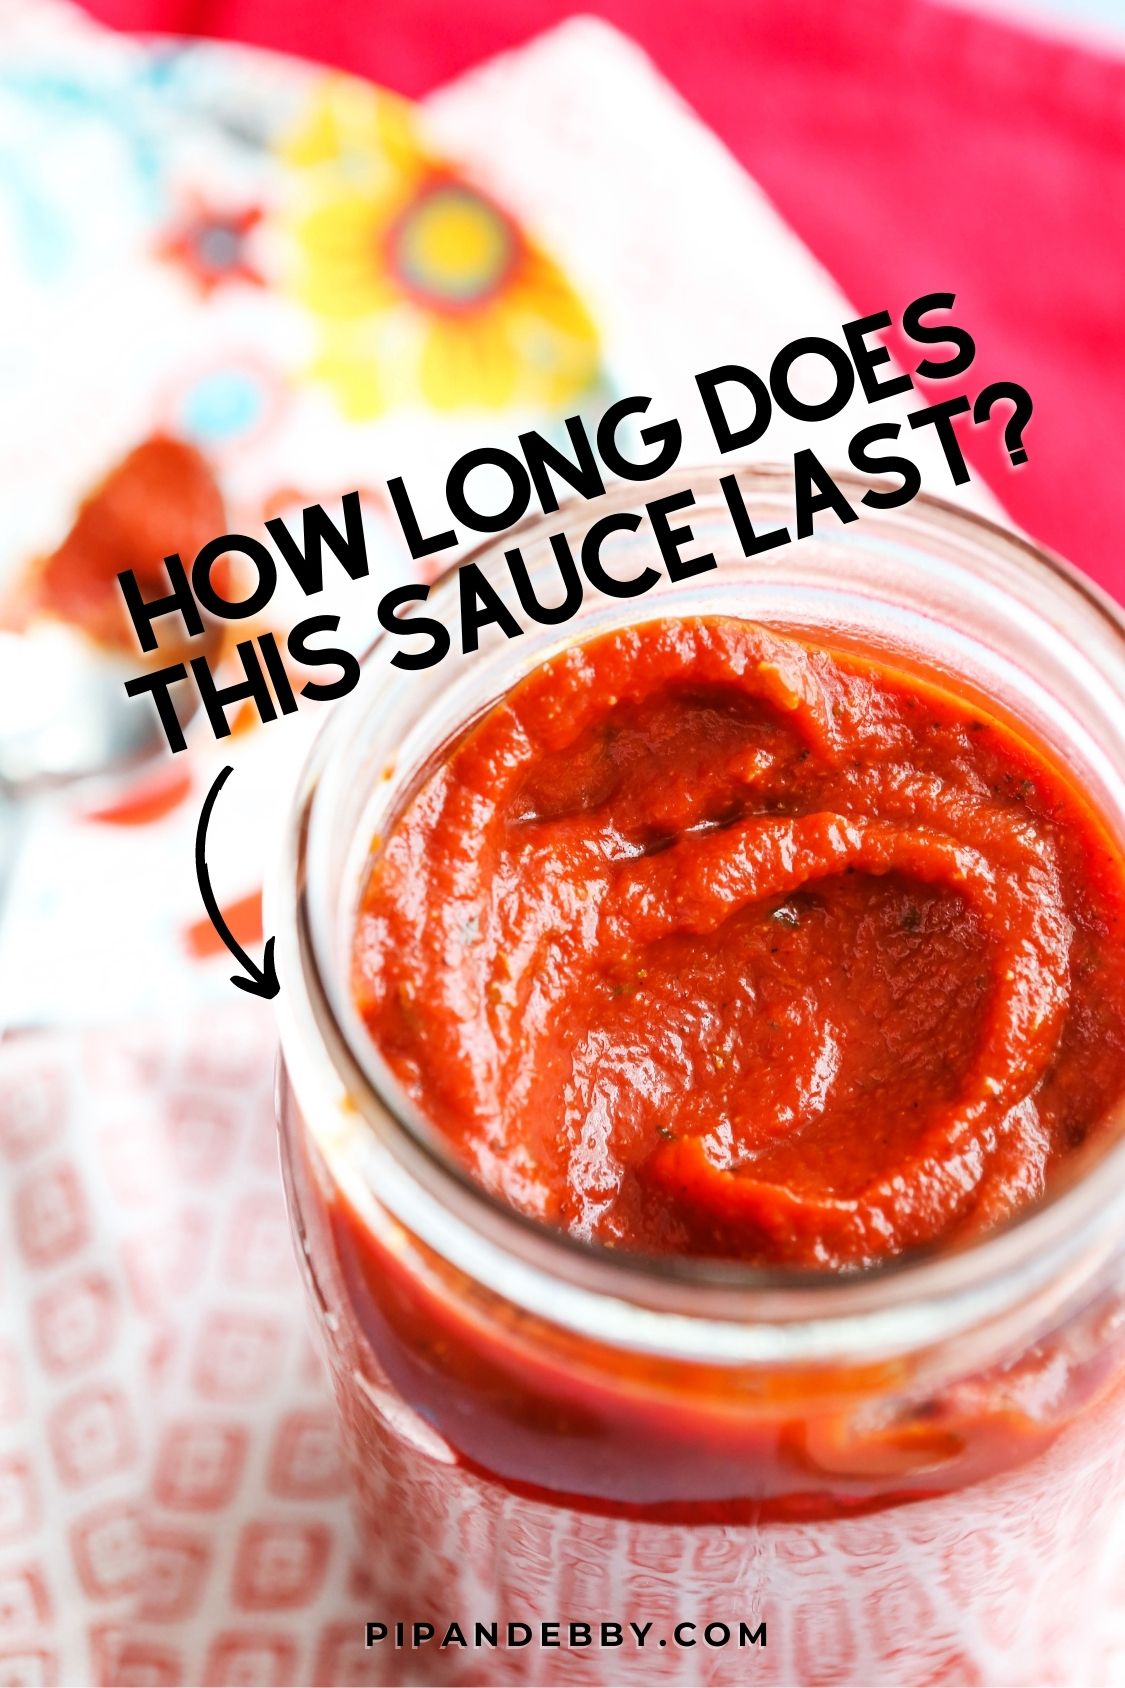 Jar of pizza sauce with text overlay reading, "How long does this sauce last?"